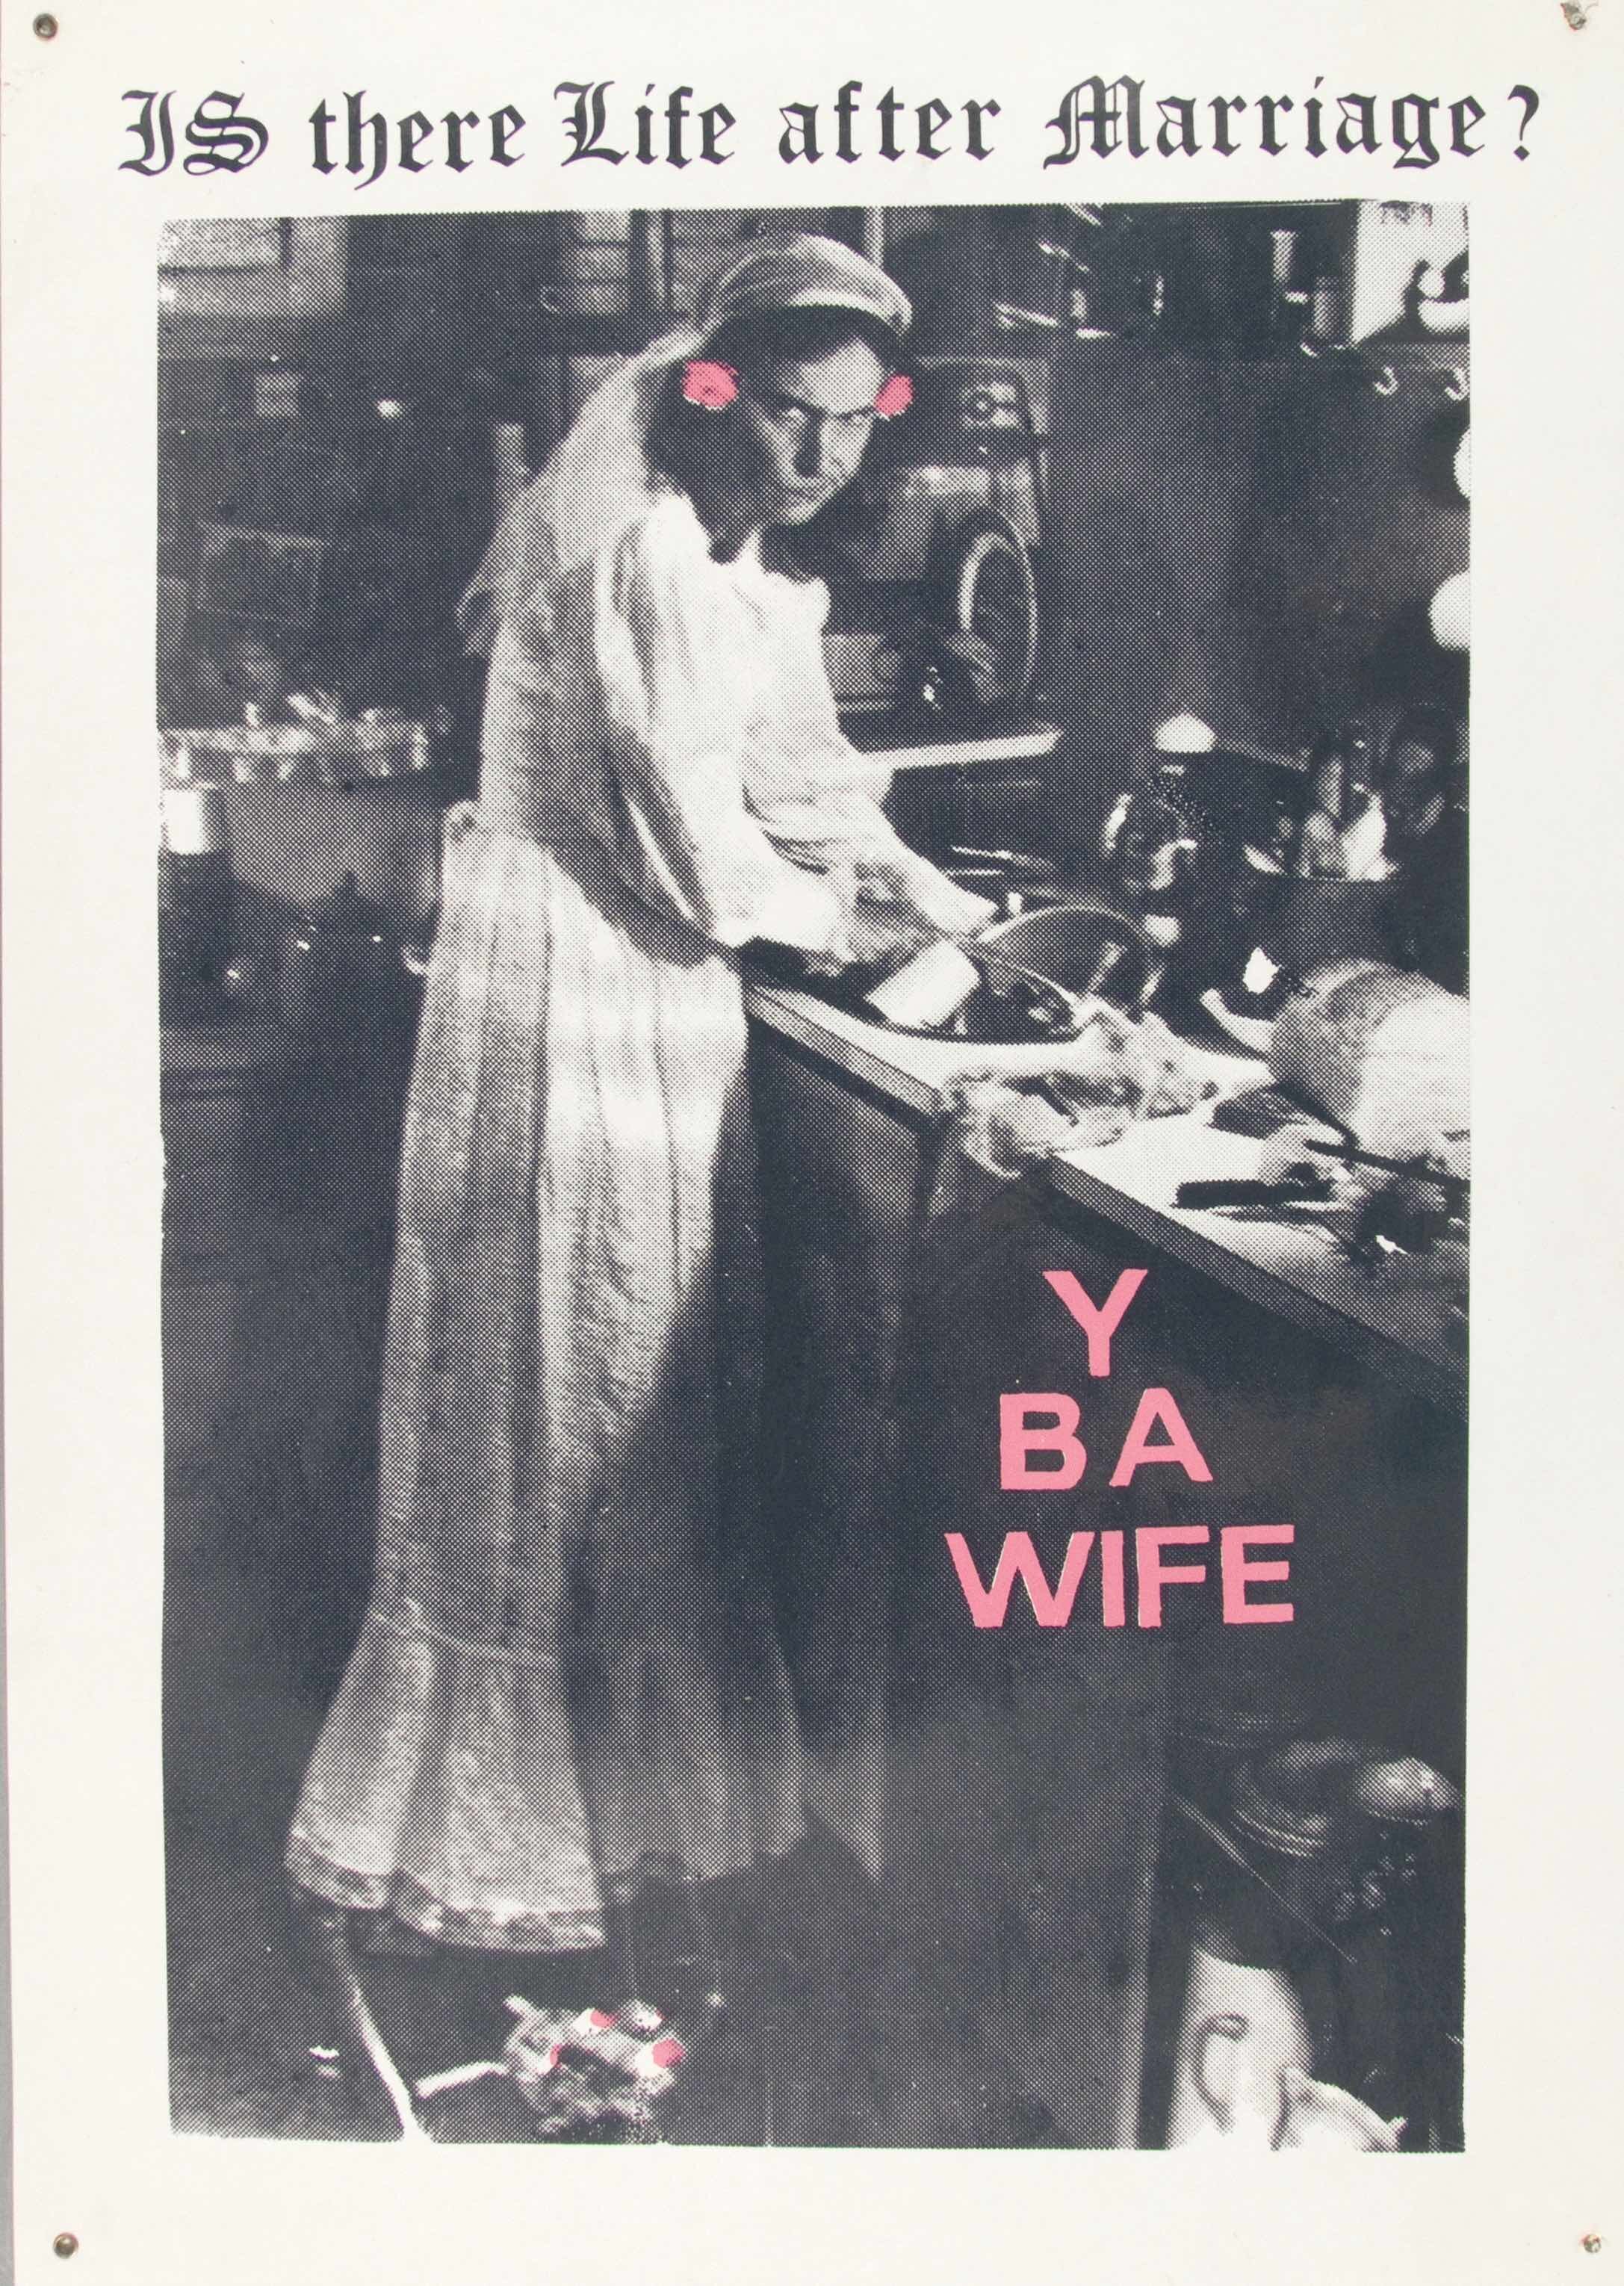   ‘Is there life after marriage?’: Y B A Wife campaign. Image    source   .  